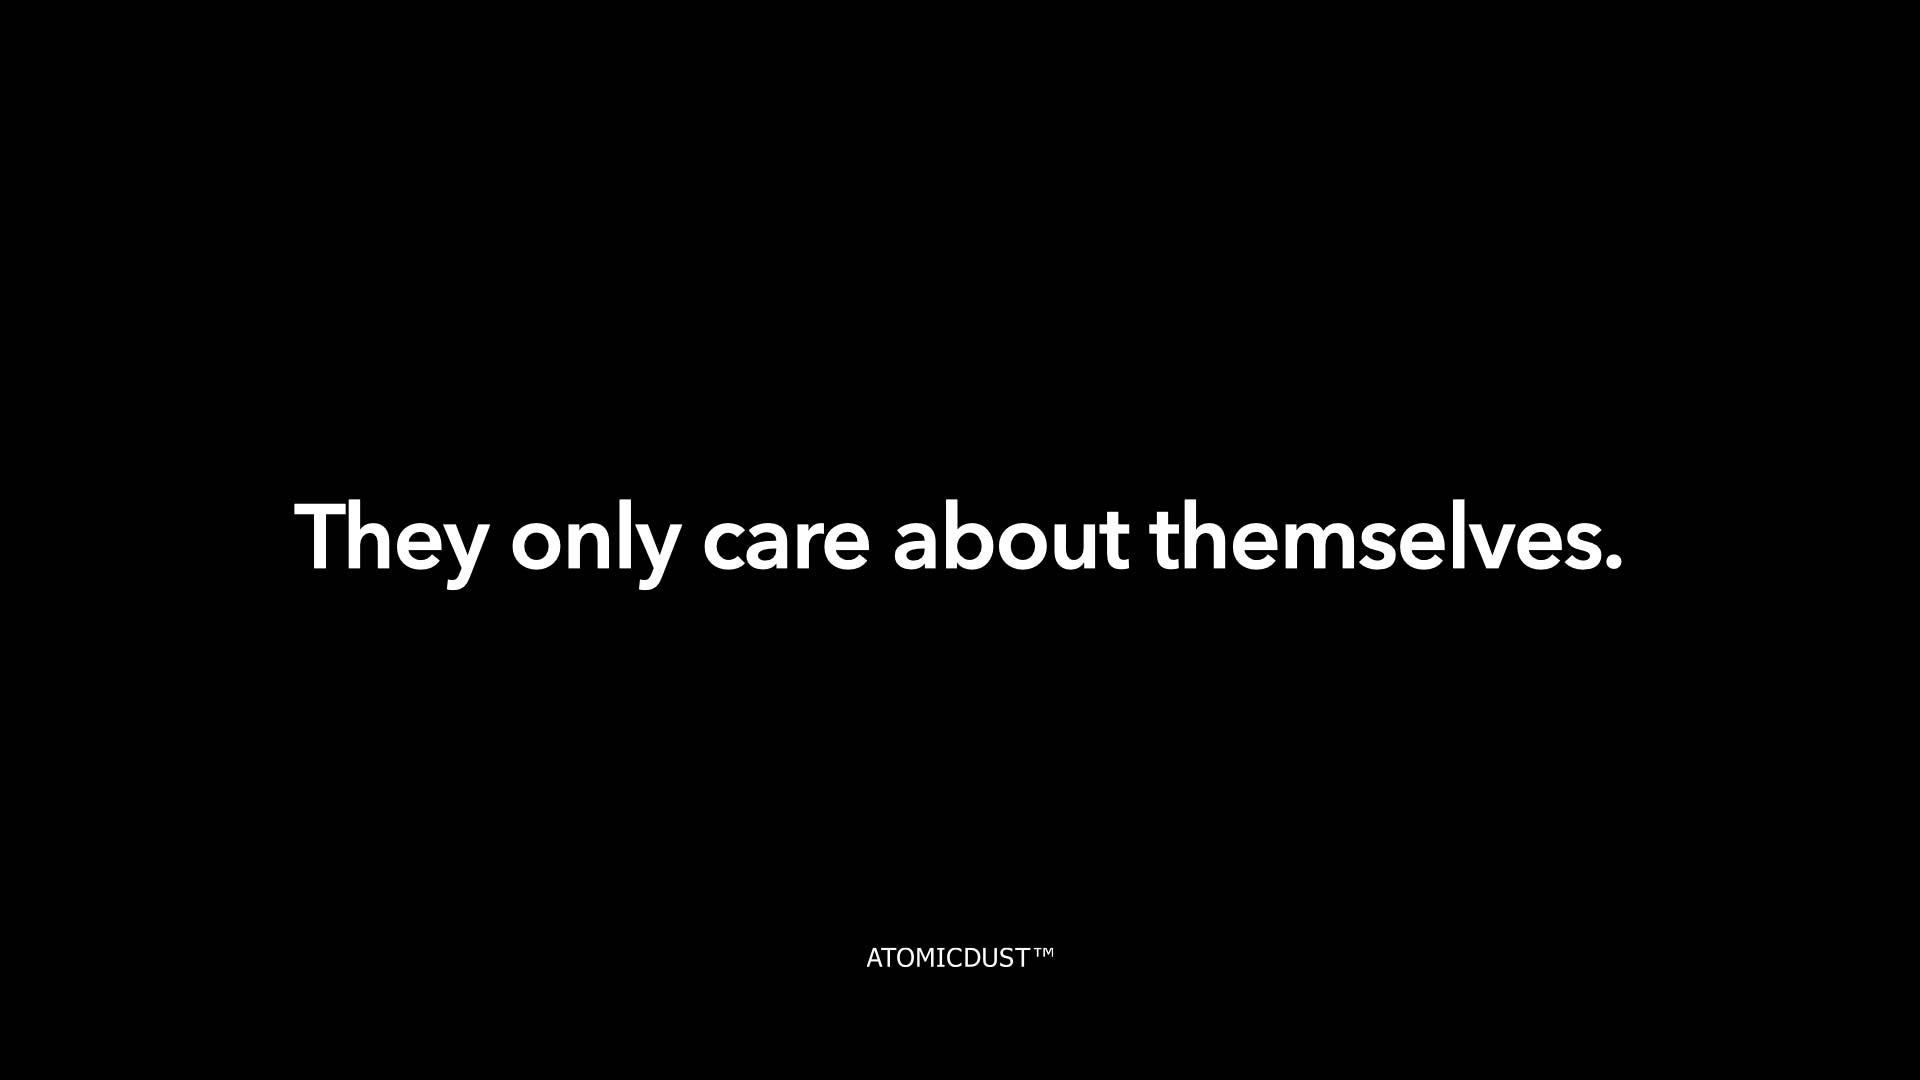 A black rectangle with white type that says "They only care about themselves."